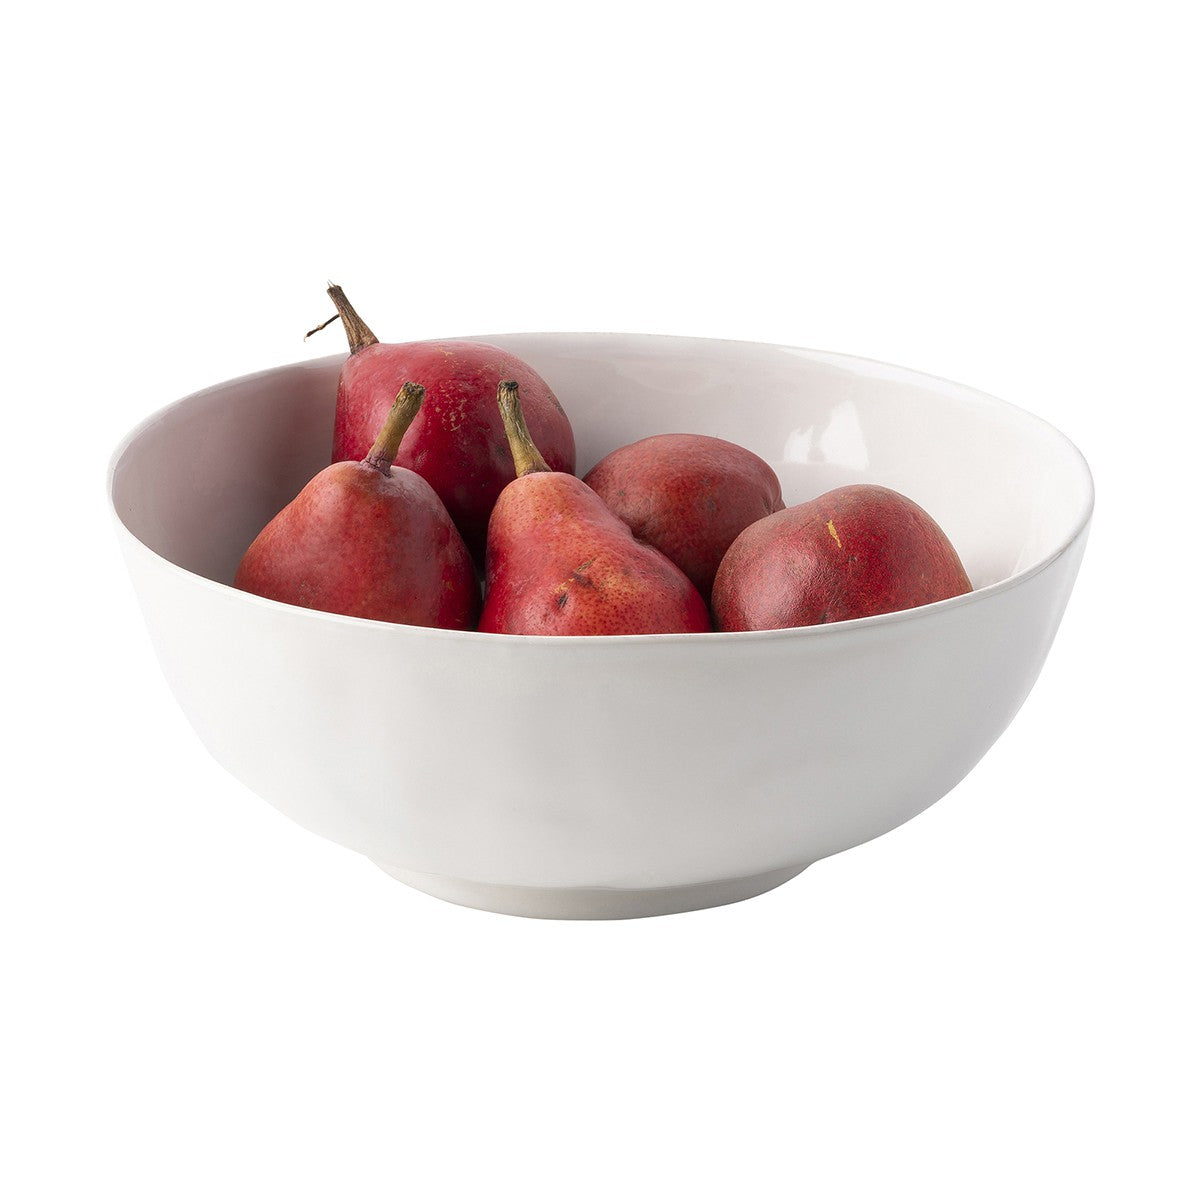 puro serving bowl filled with pears on a white background